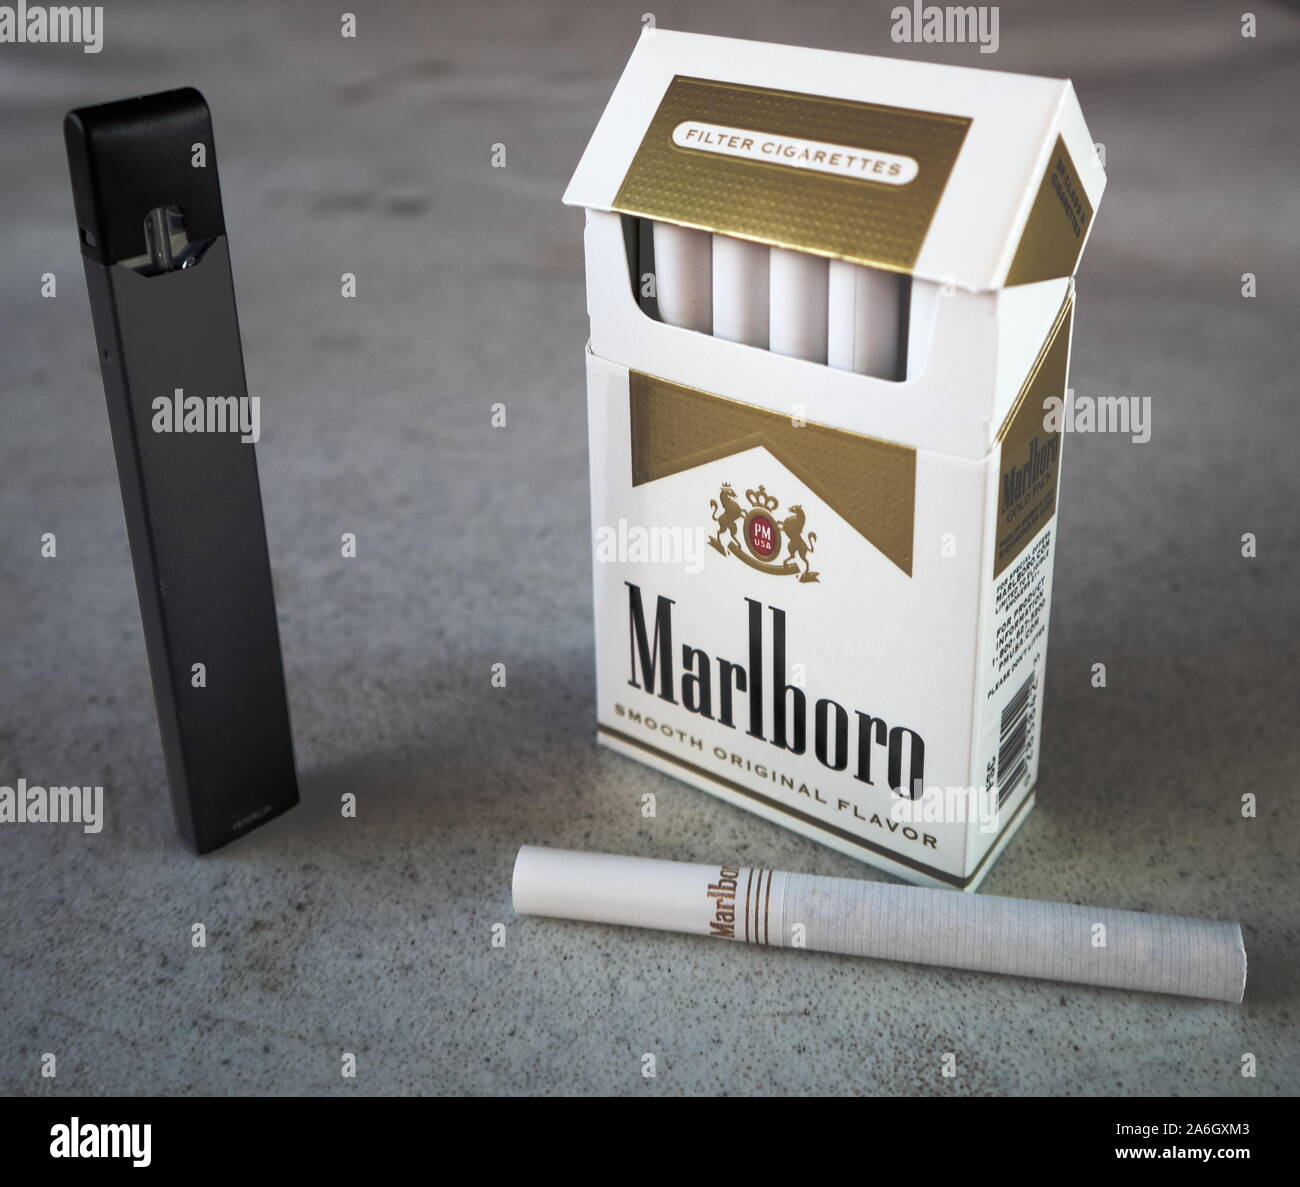 Marlboro Cigarettes High Resolution Stock Photography and Images - Alamy